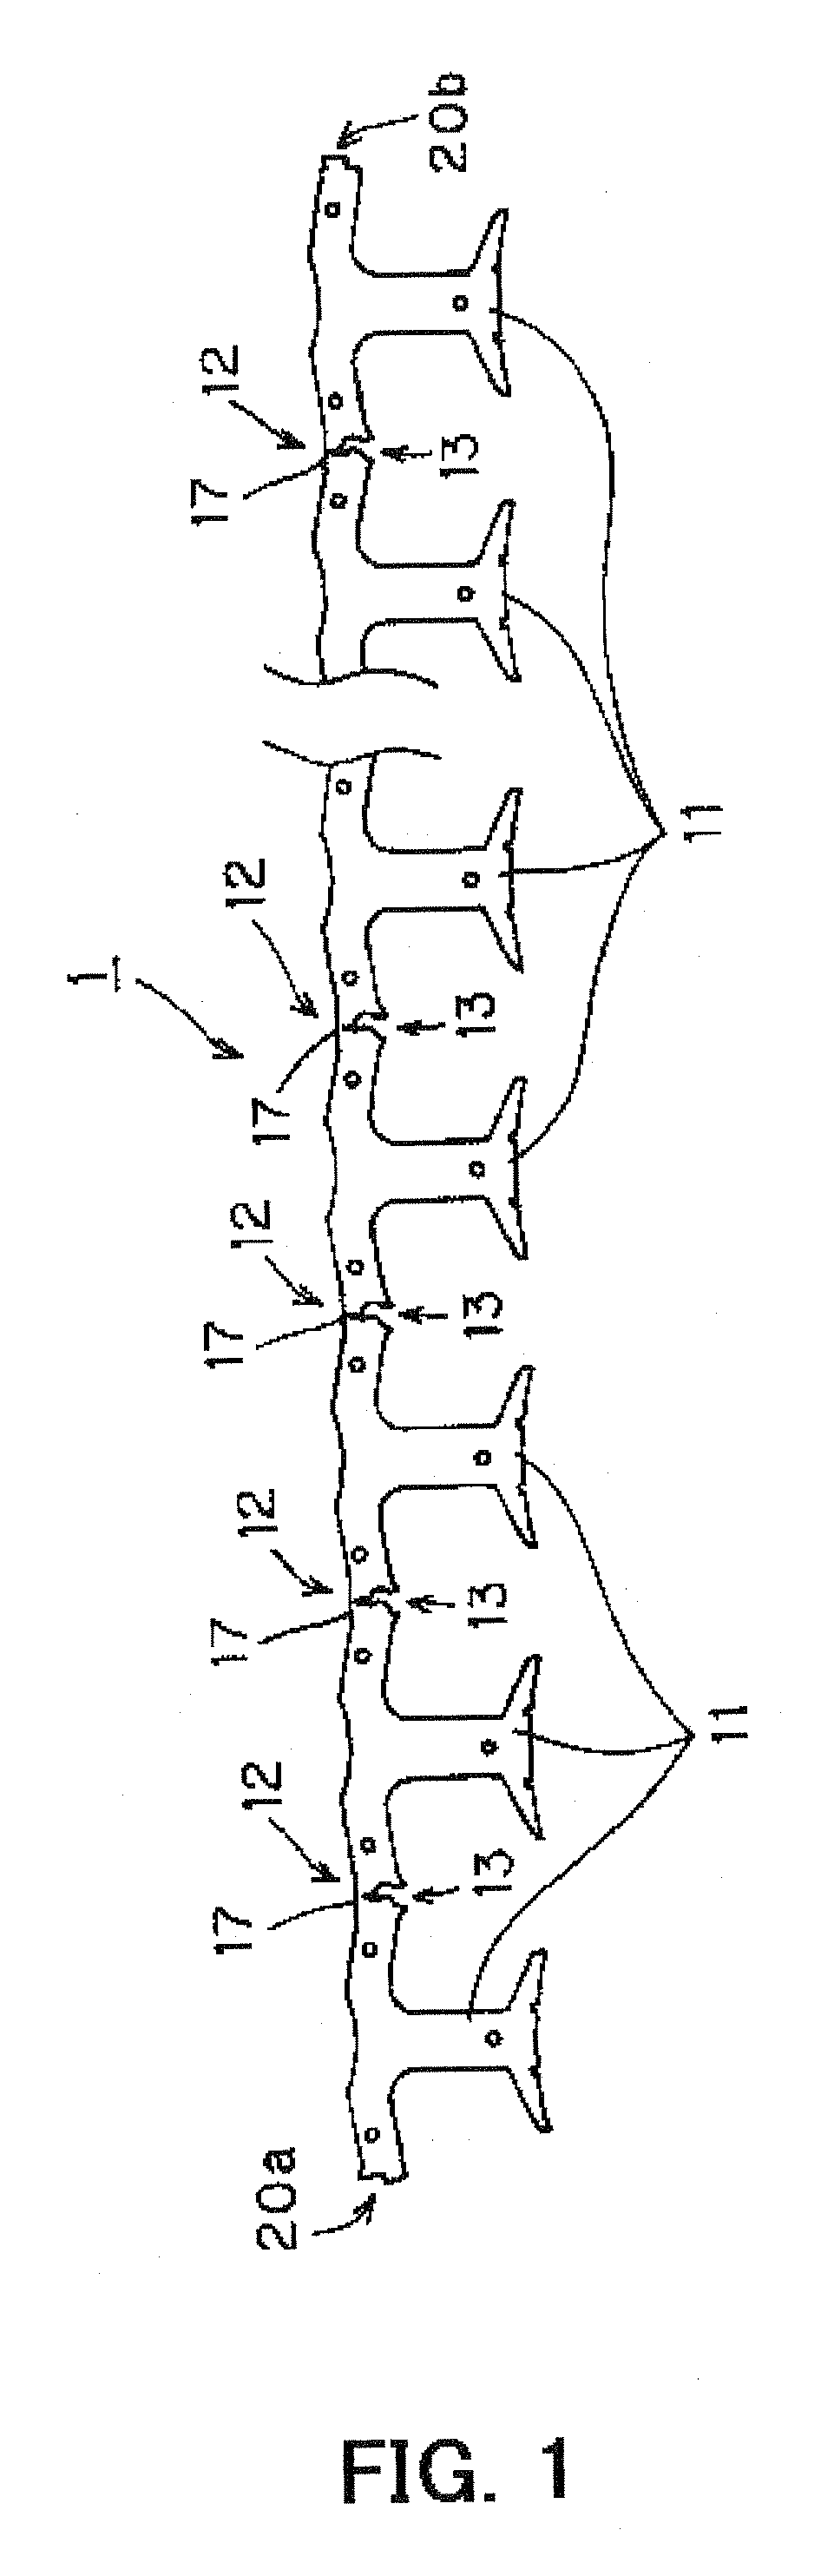 Stator core, an electric motor in which it is utilized, and method of manufacturing a stator core